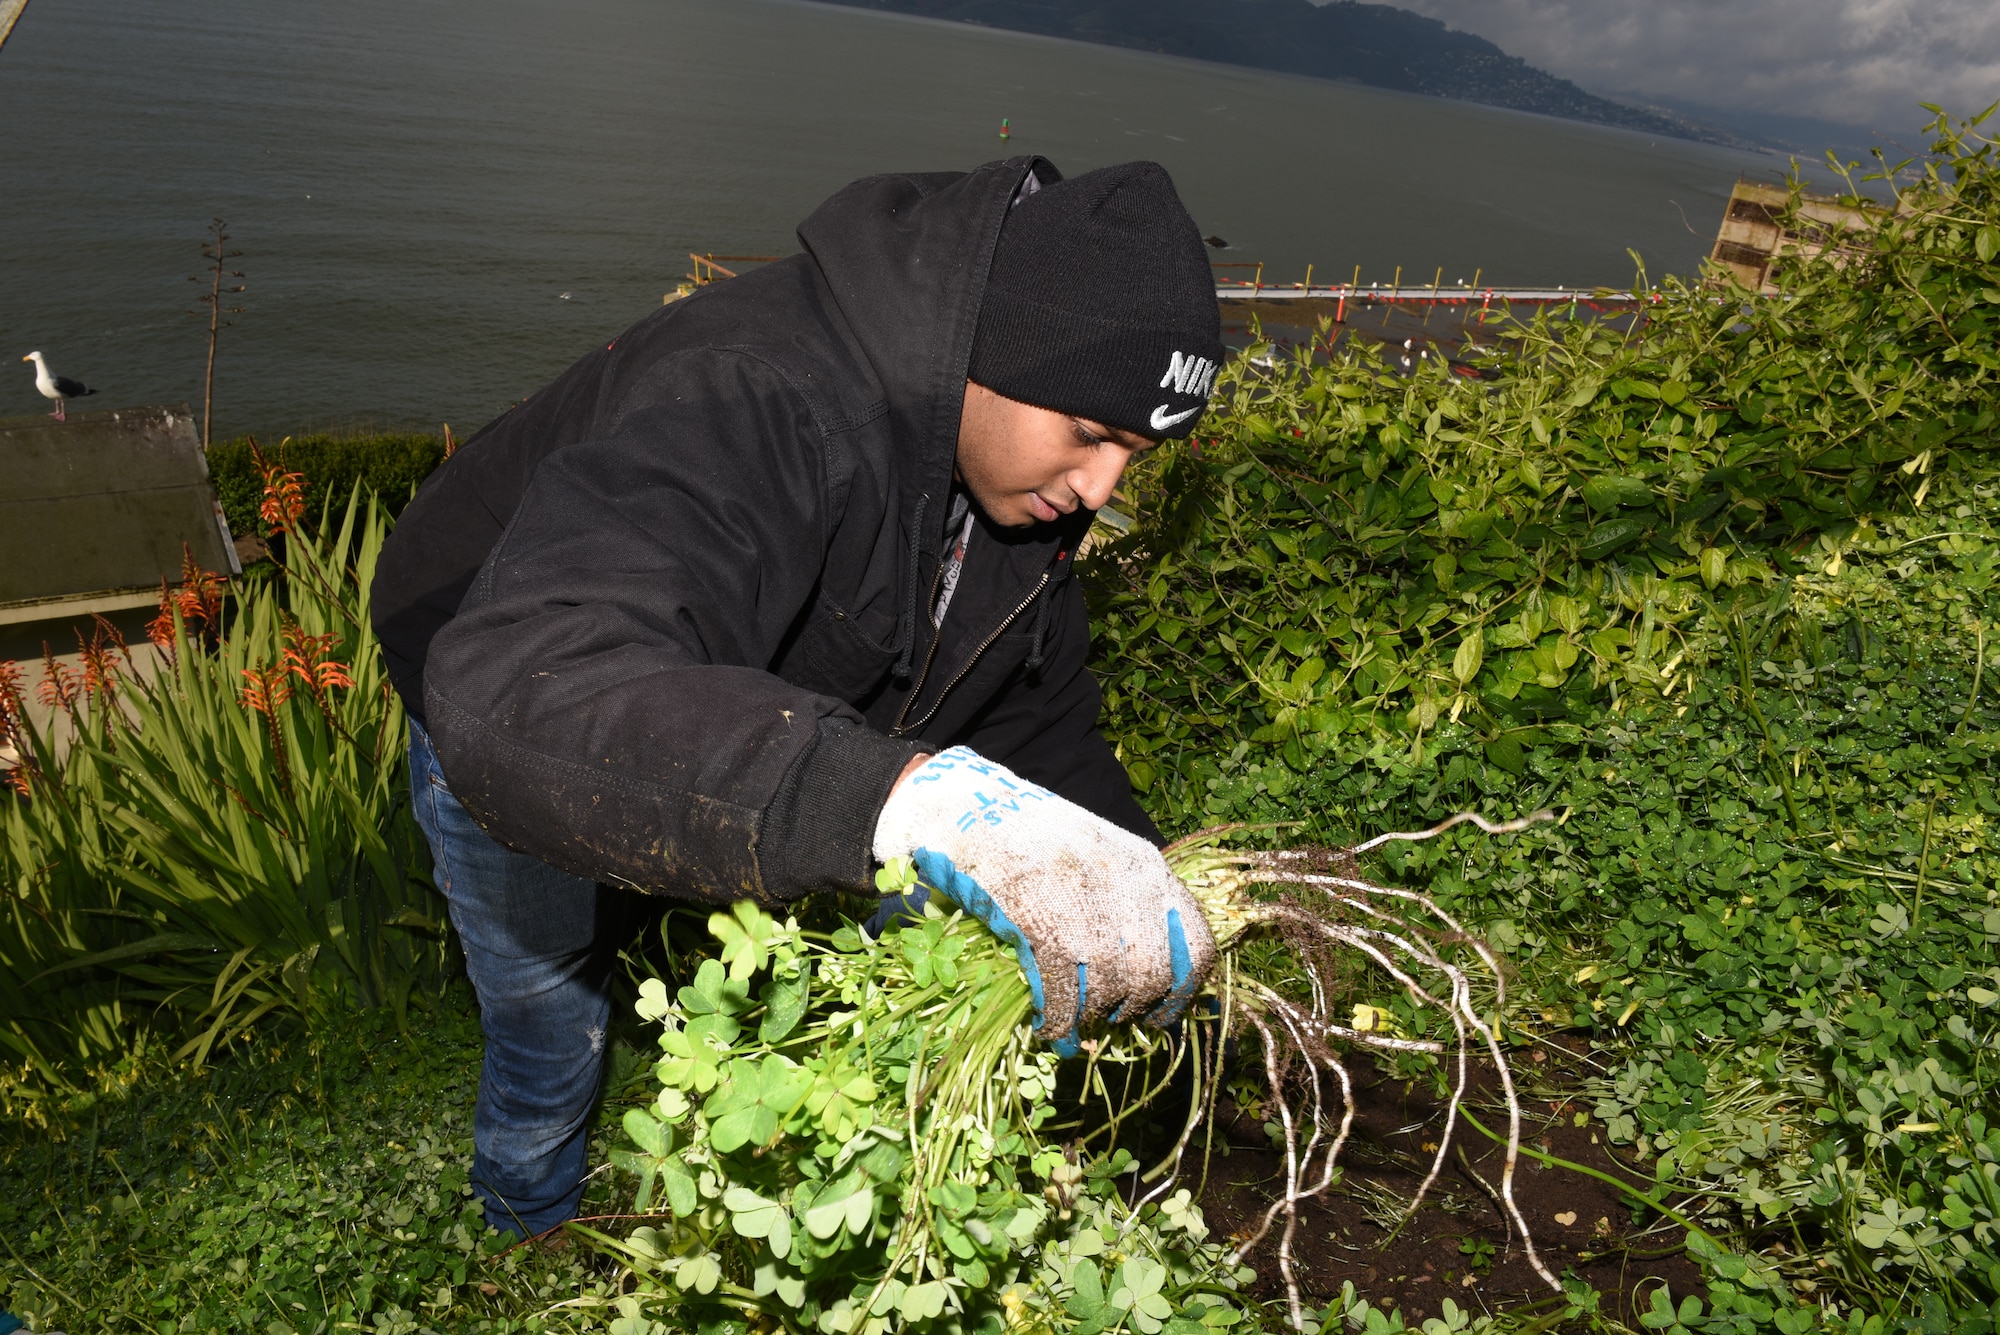 U.S. Air Force Staff Sgt. Kumar Shamal, 60th Operations Support Squadron flight equipment technician, pulls weeds from the gardens on Alcatraz Isalnd 9 a.m. Feb. 9, 2019, in San Francisco. Shamal participated in a vollunteer clean up to help out his local community. (U.S. Air Force photo by Airman 1st Class Otte)